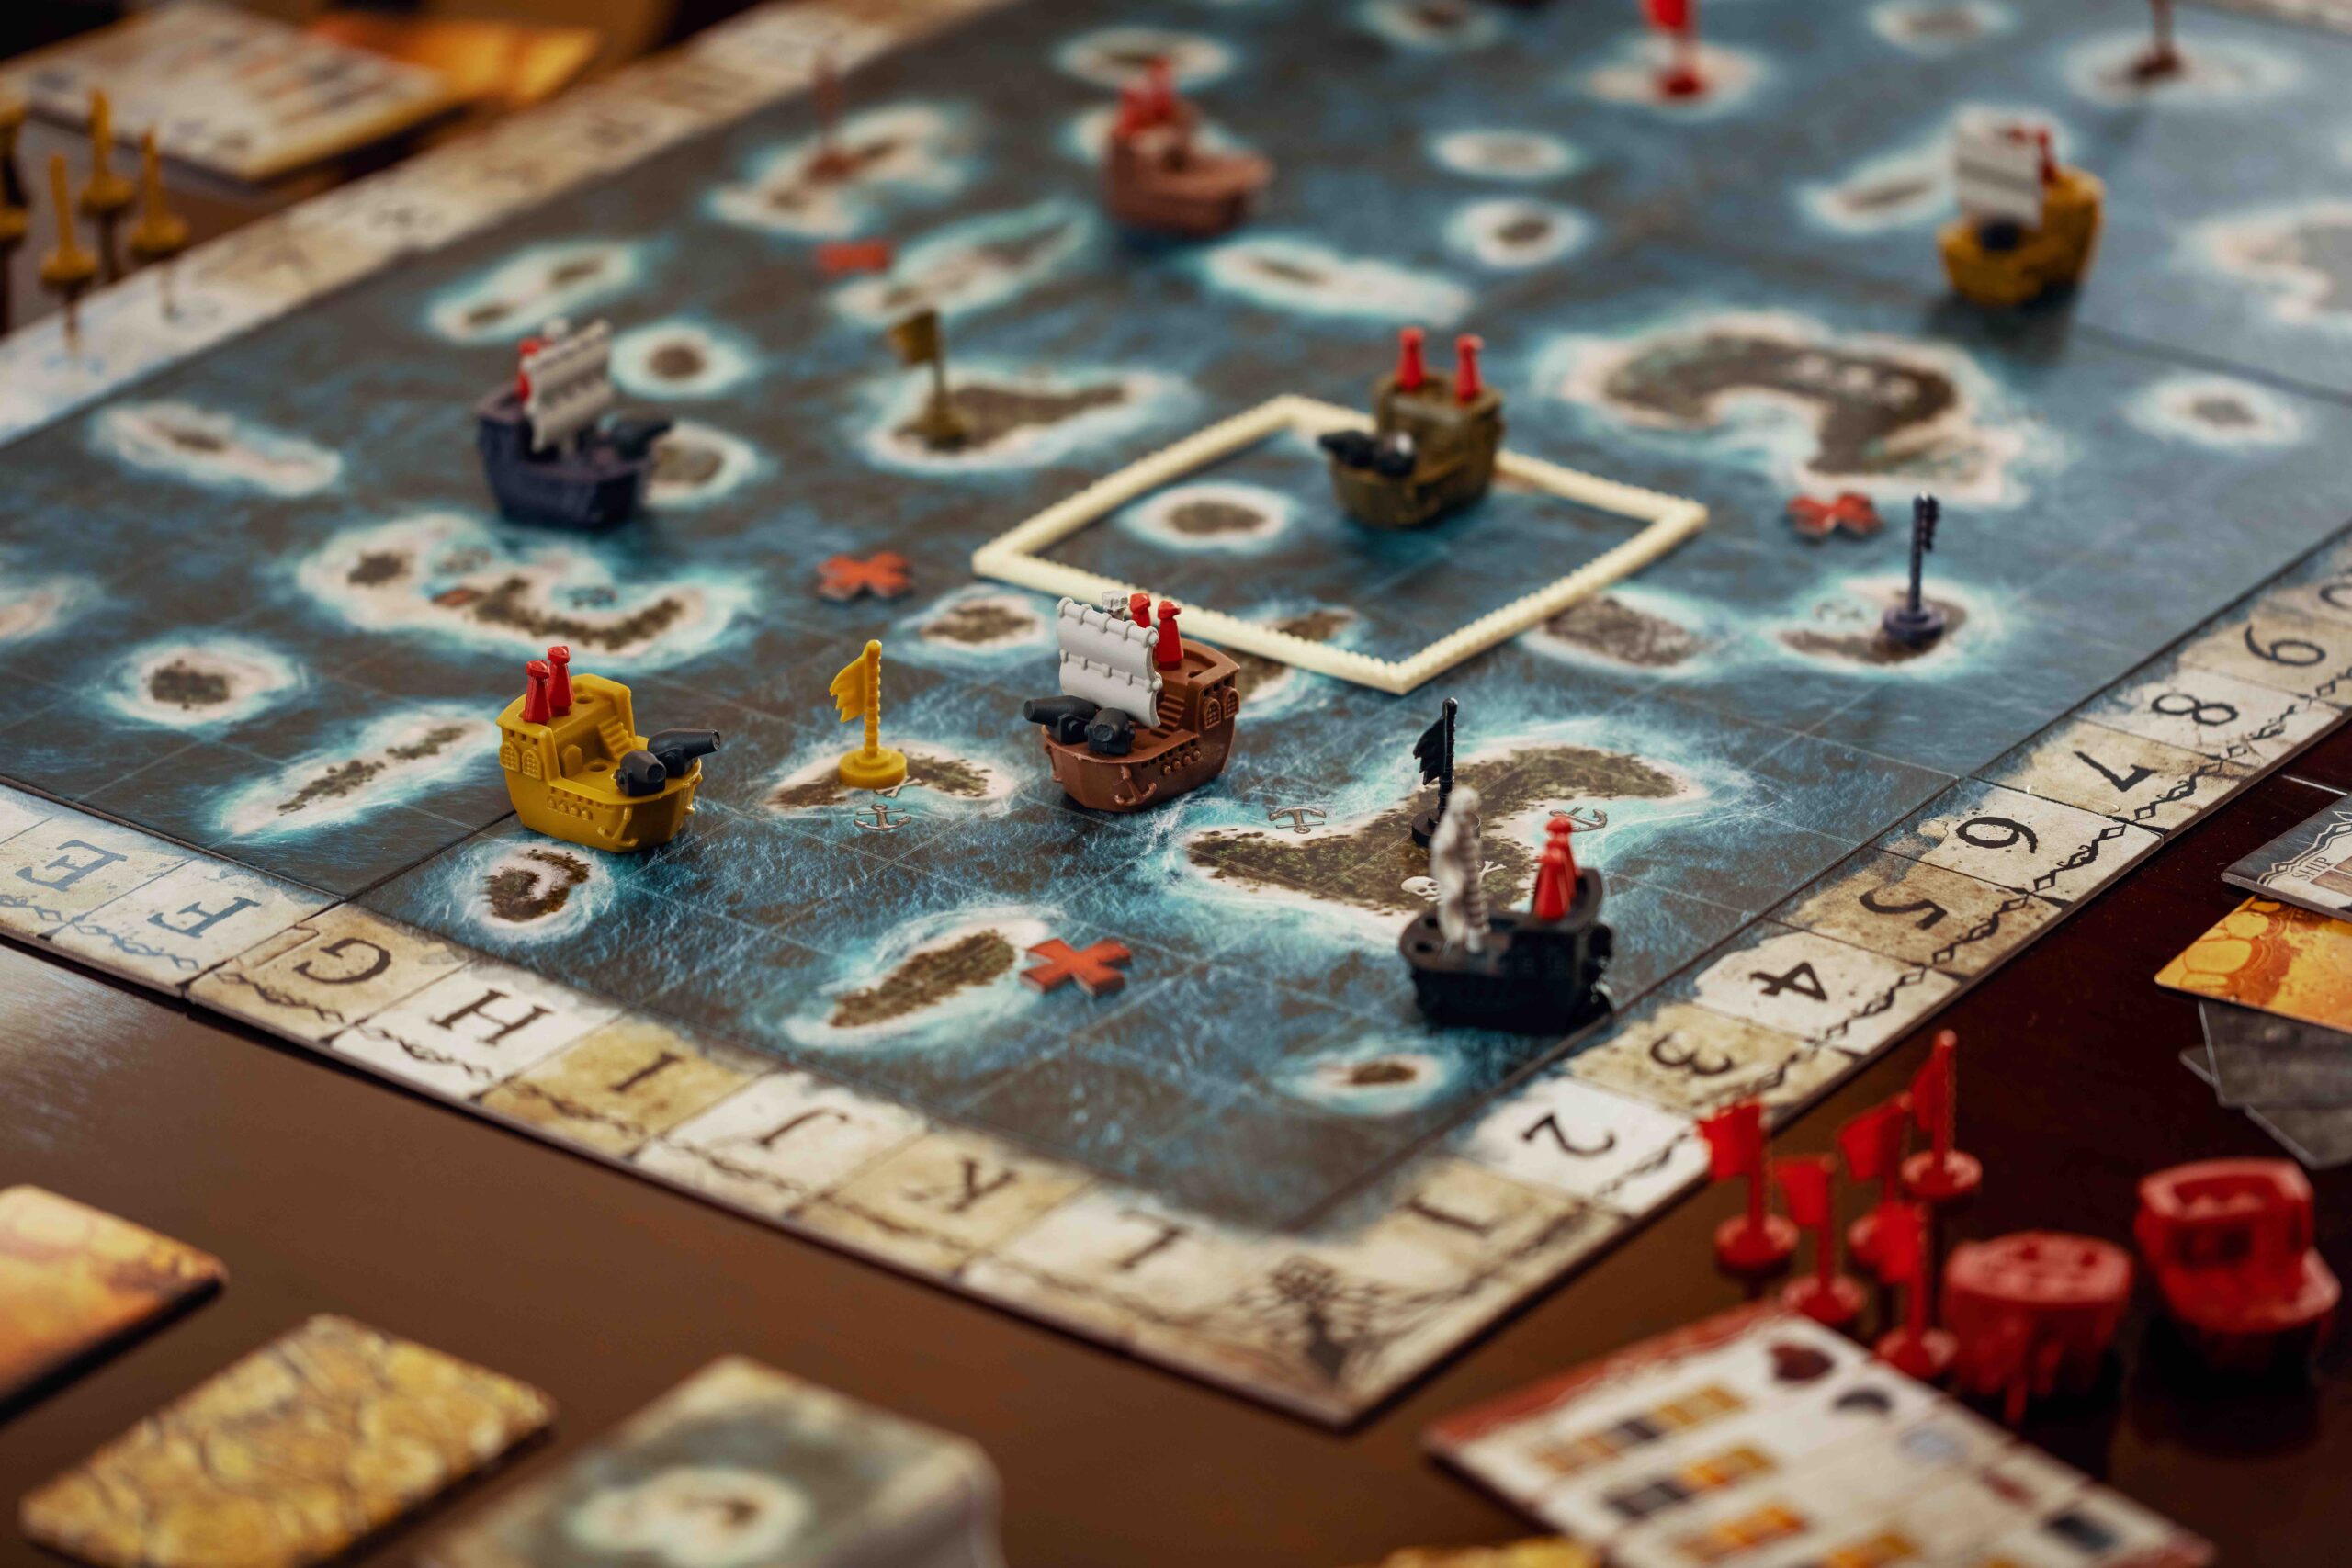 Your Next Board Game Night Classic: Plunder A Pirate’s Life